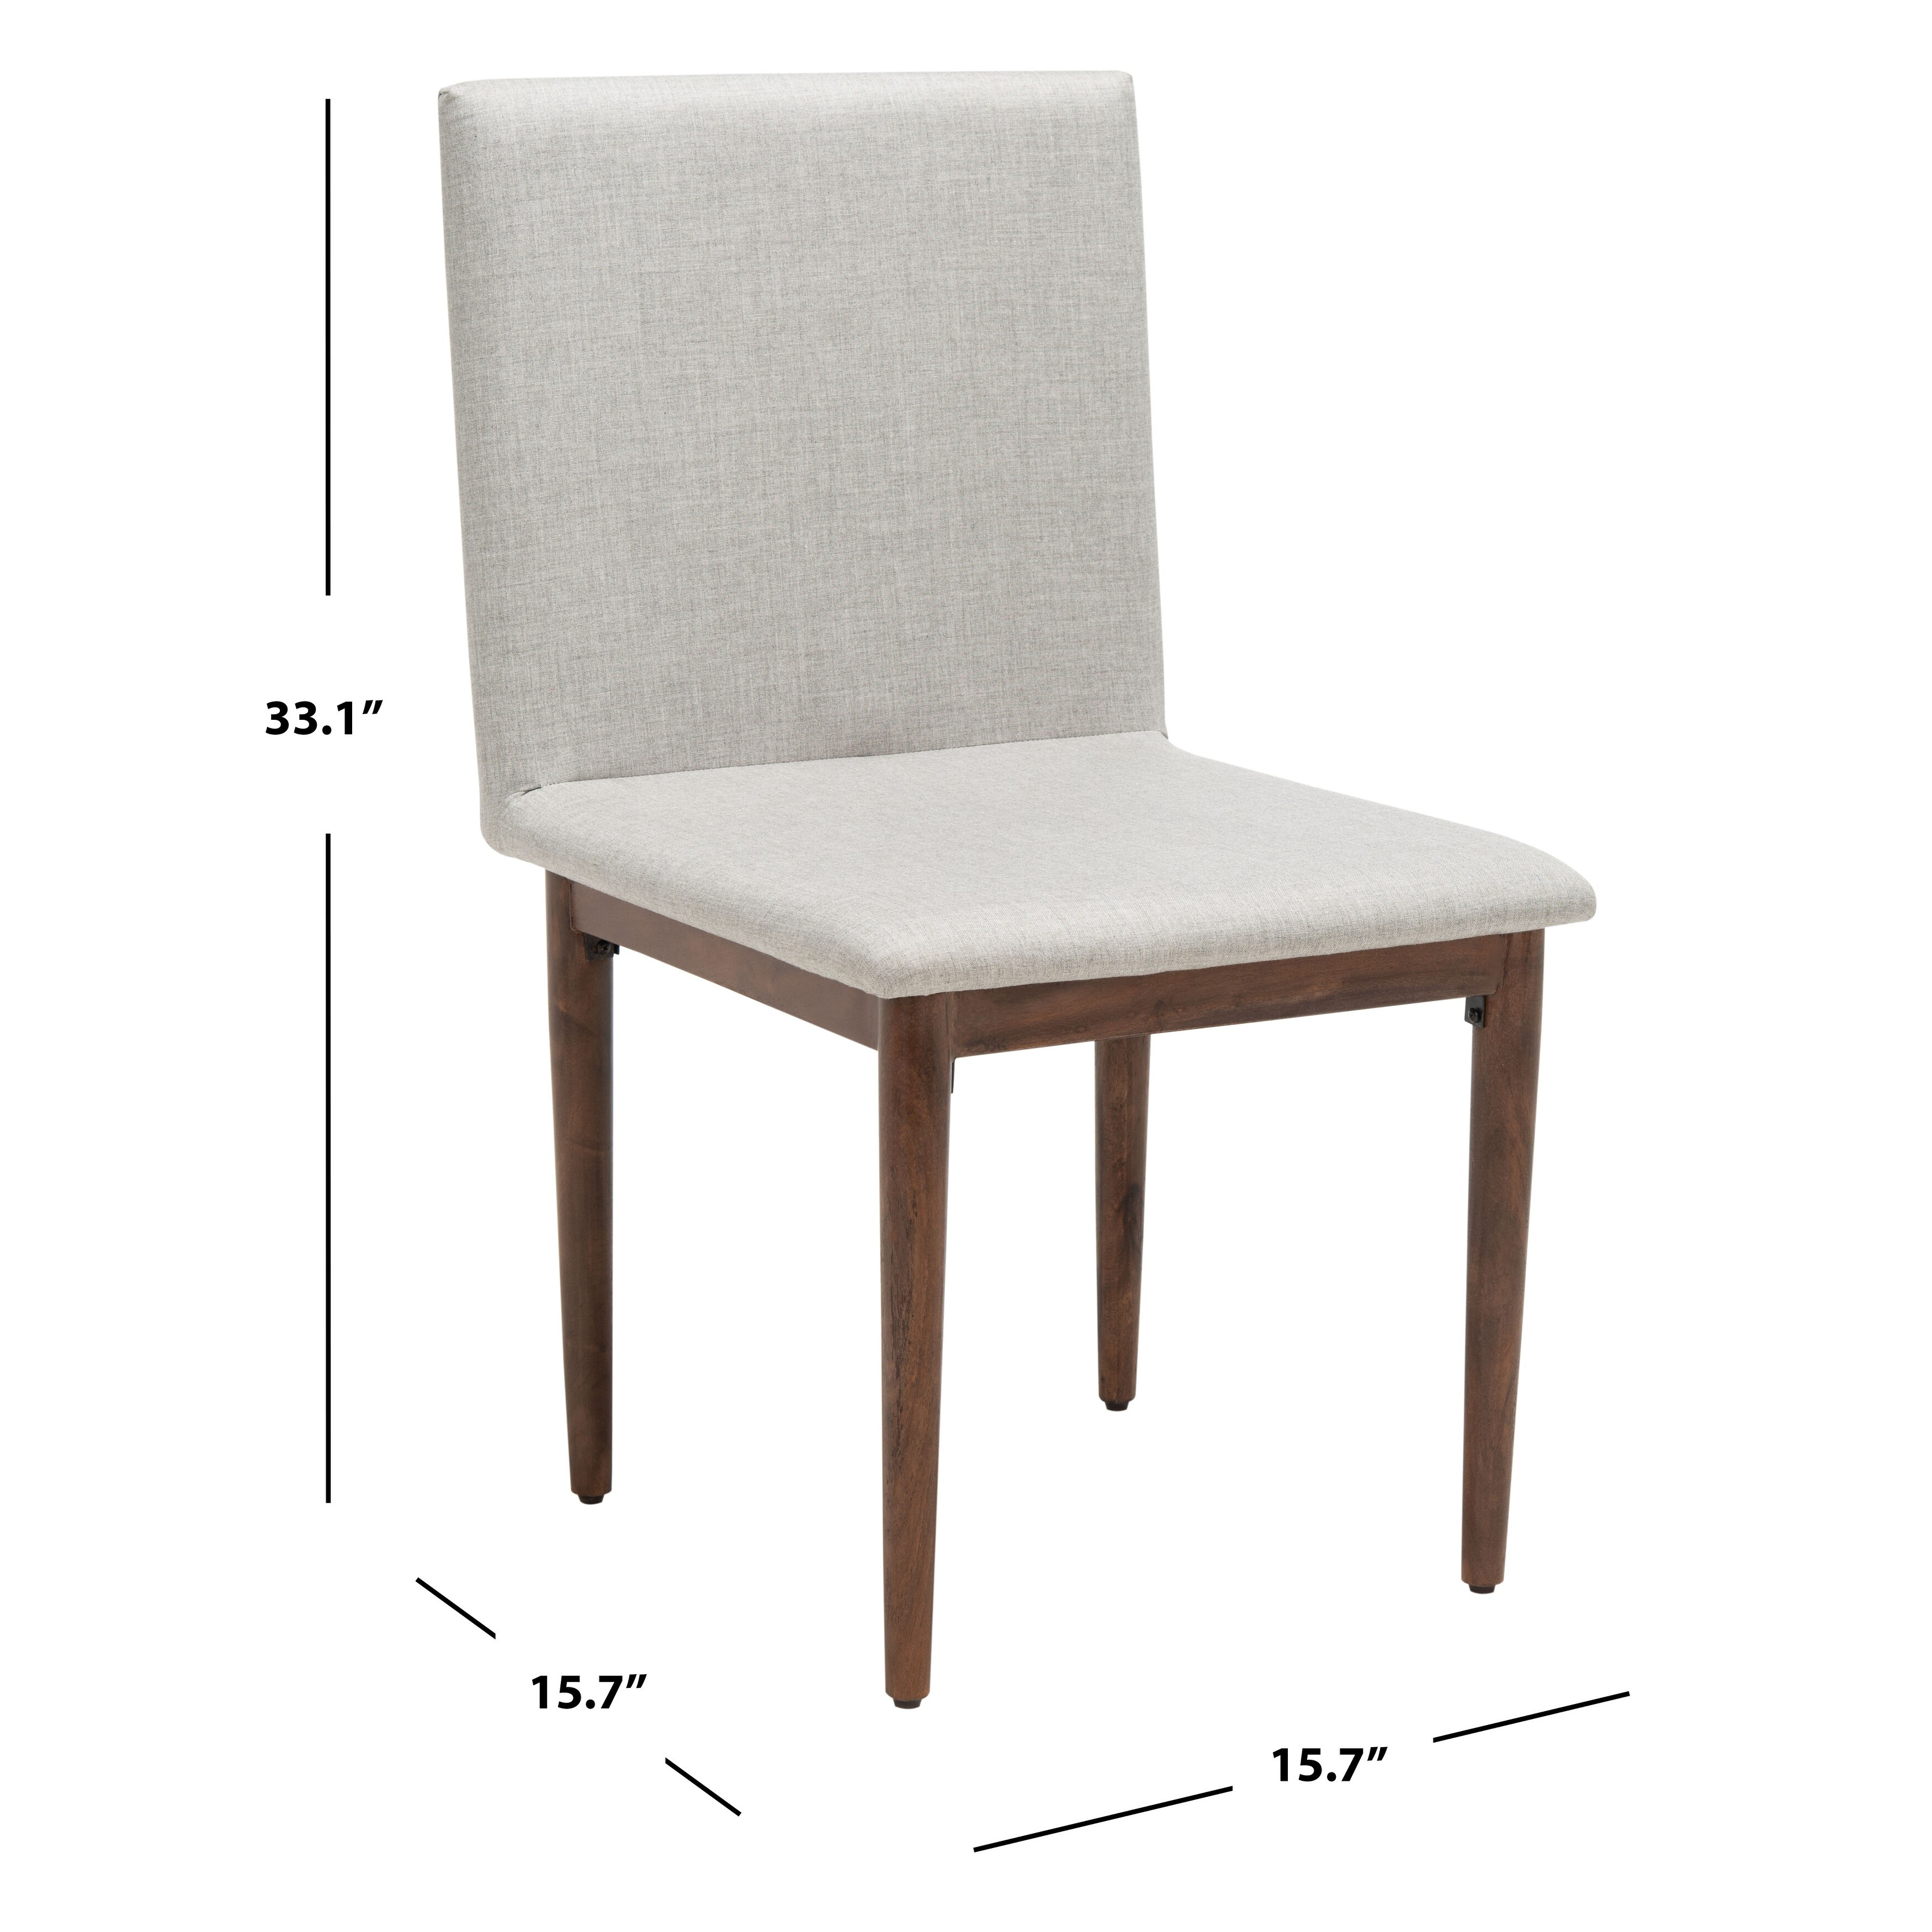 SAFAVIEH Couture Milana Dining Chair (Set of 2) - 18.1" W x 21.7" L x 33.1" H